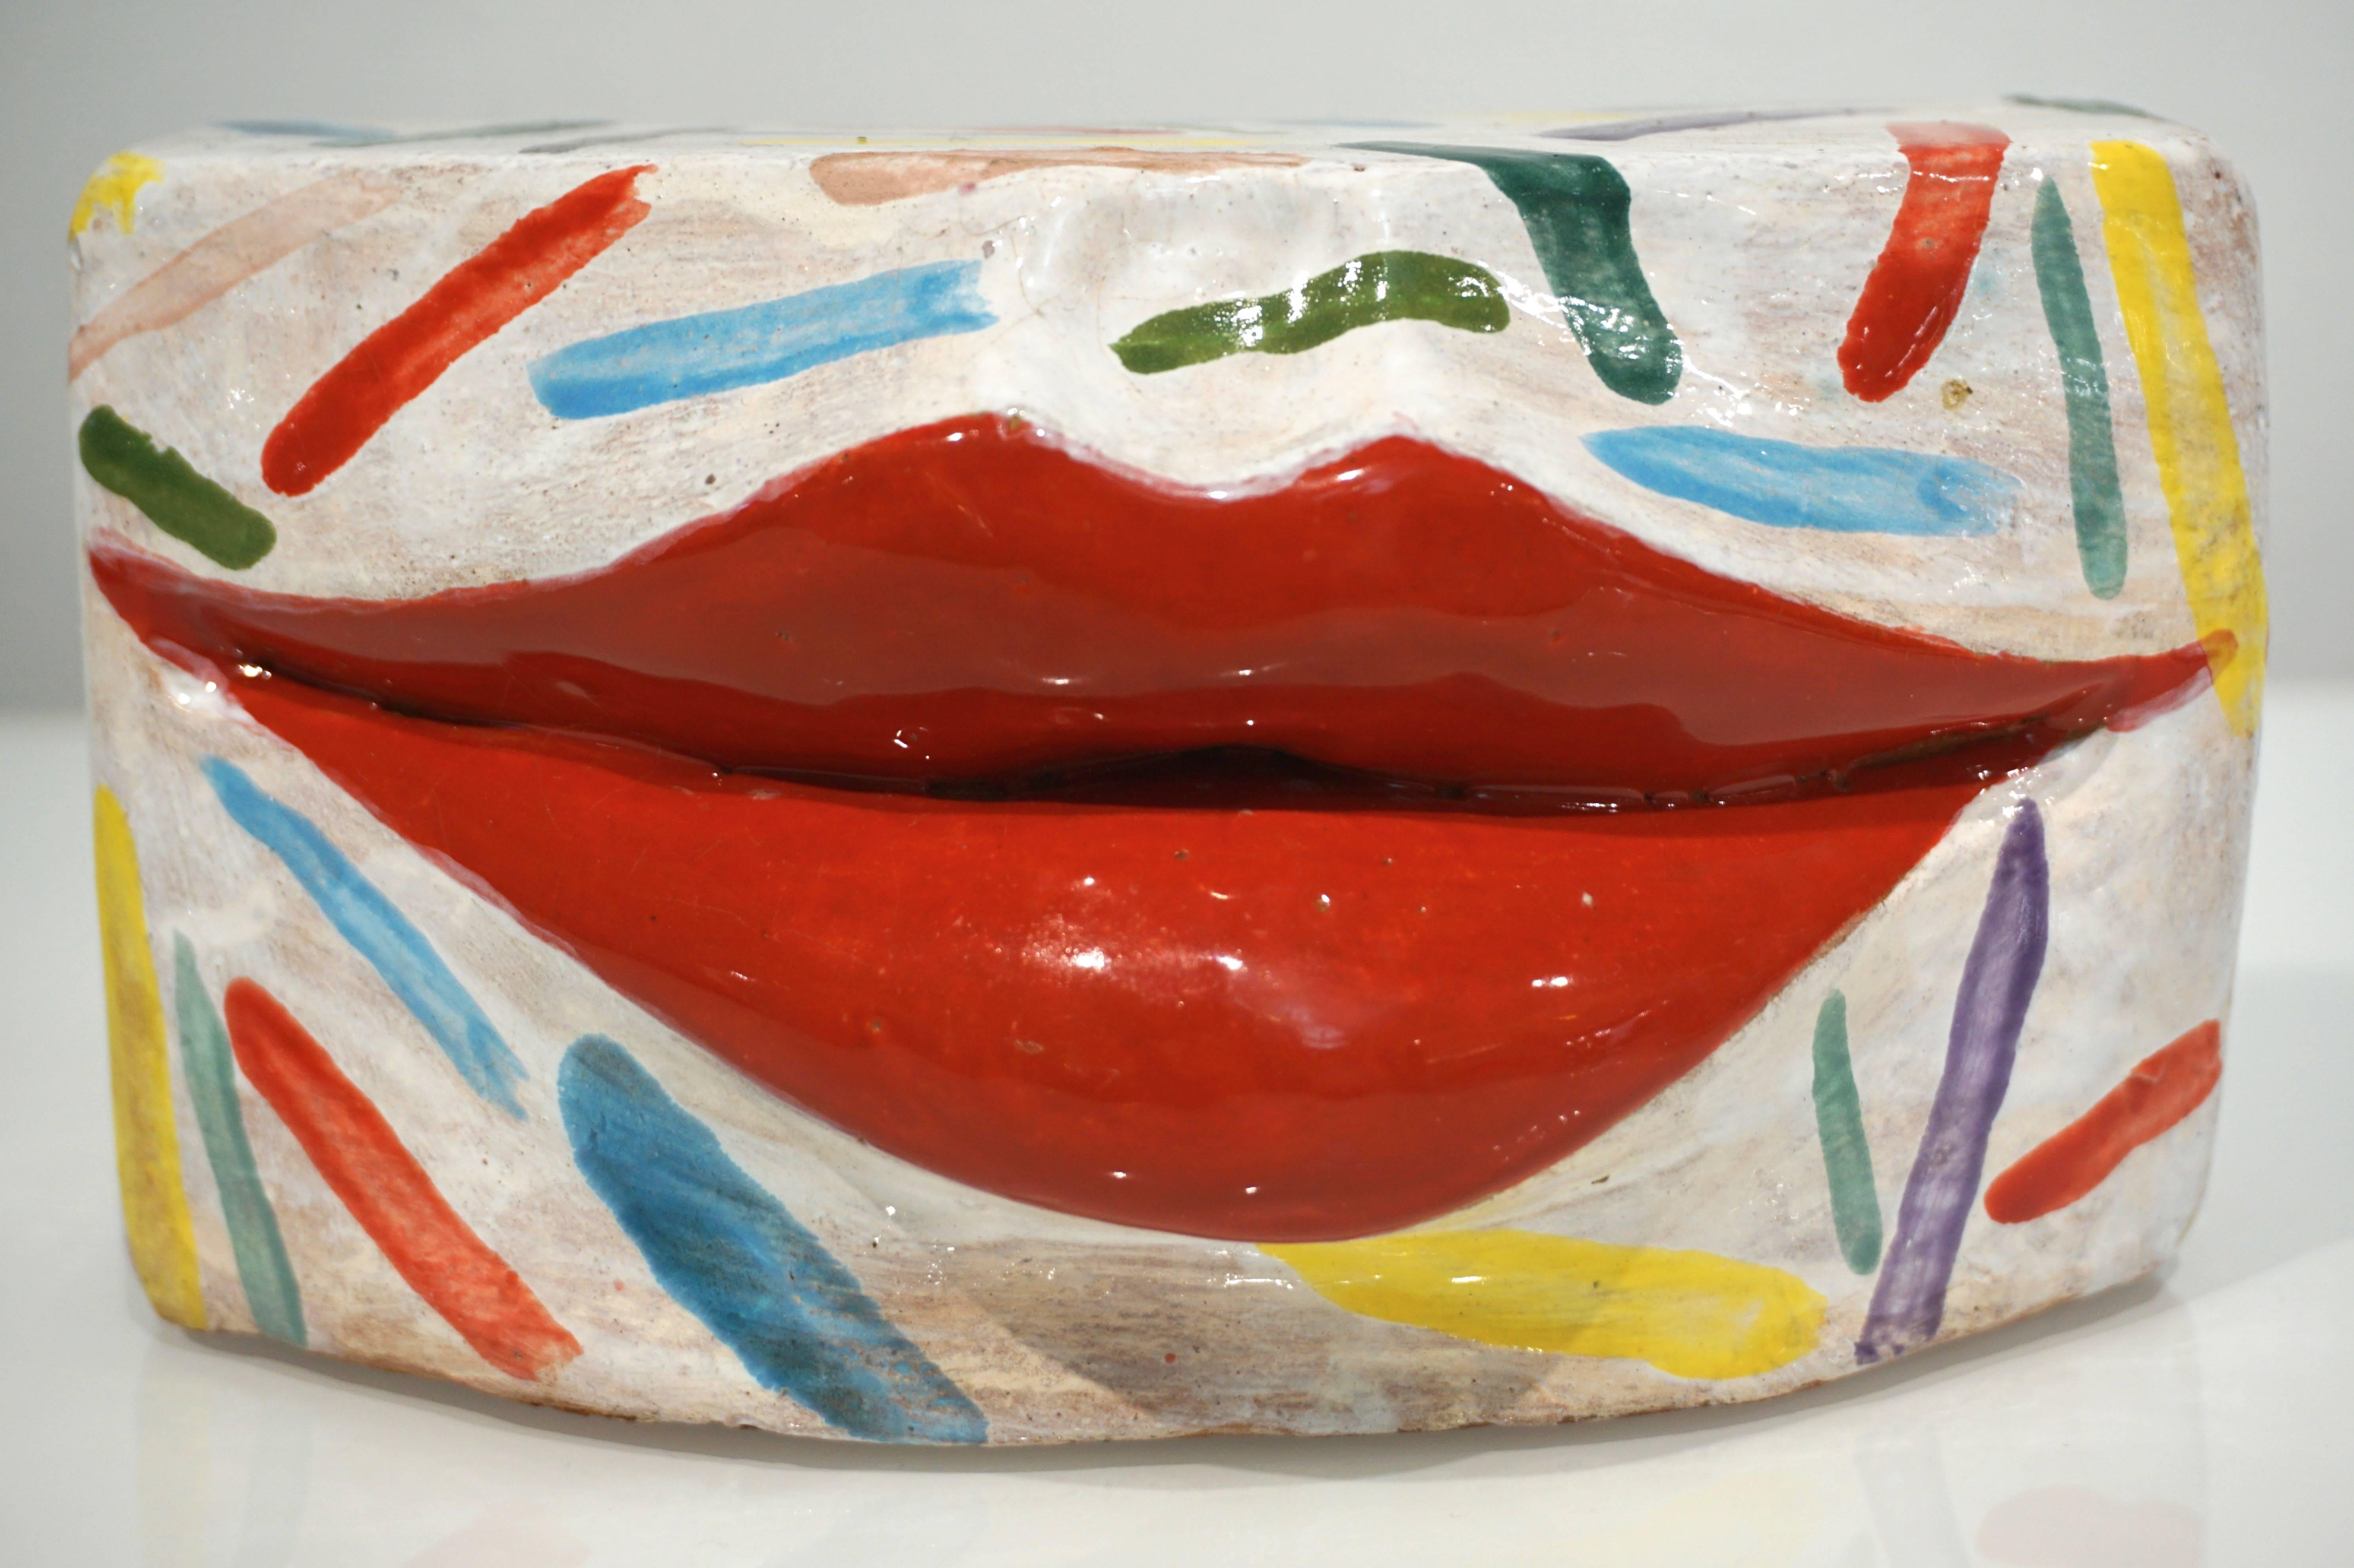 Kiss, Italian Enameled Terracotta Sculpture by Ginestroni with Lipstick Red Lips 2